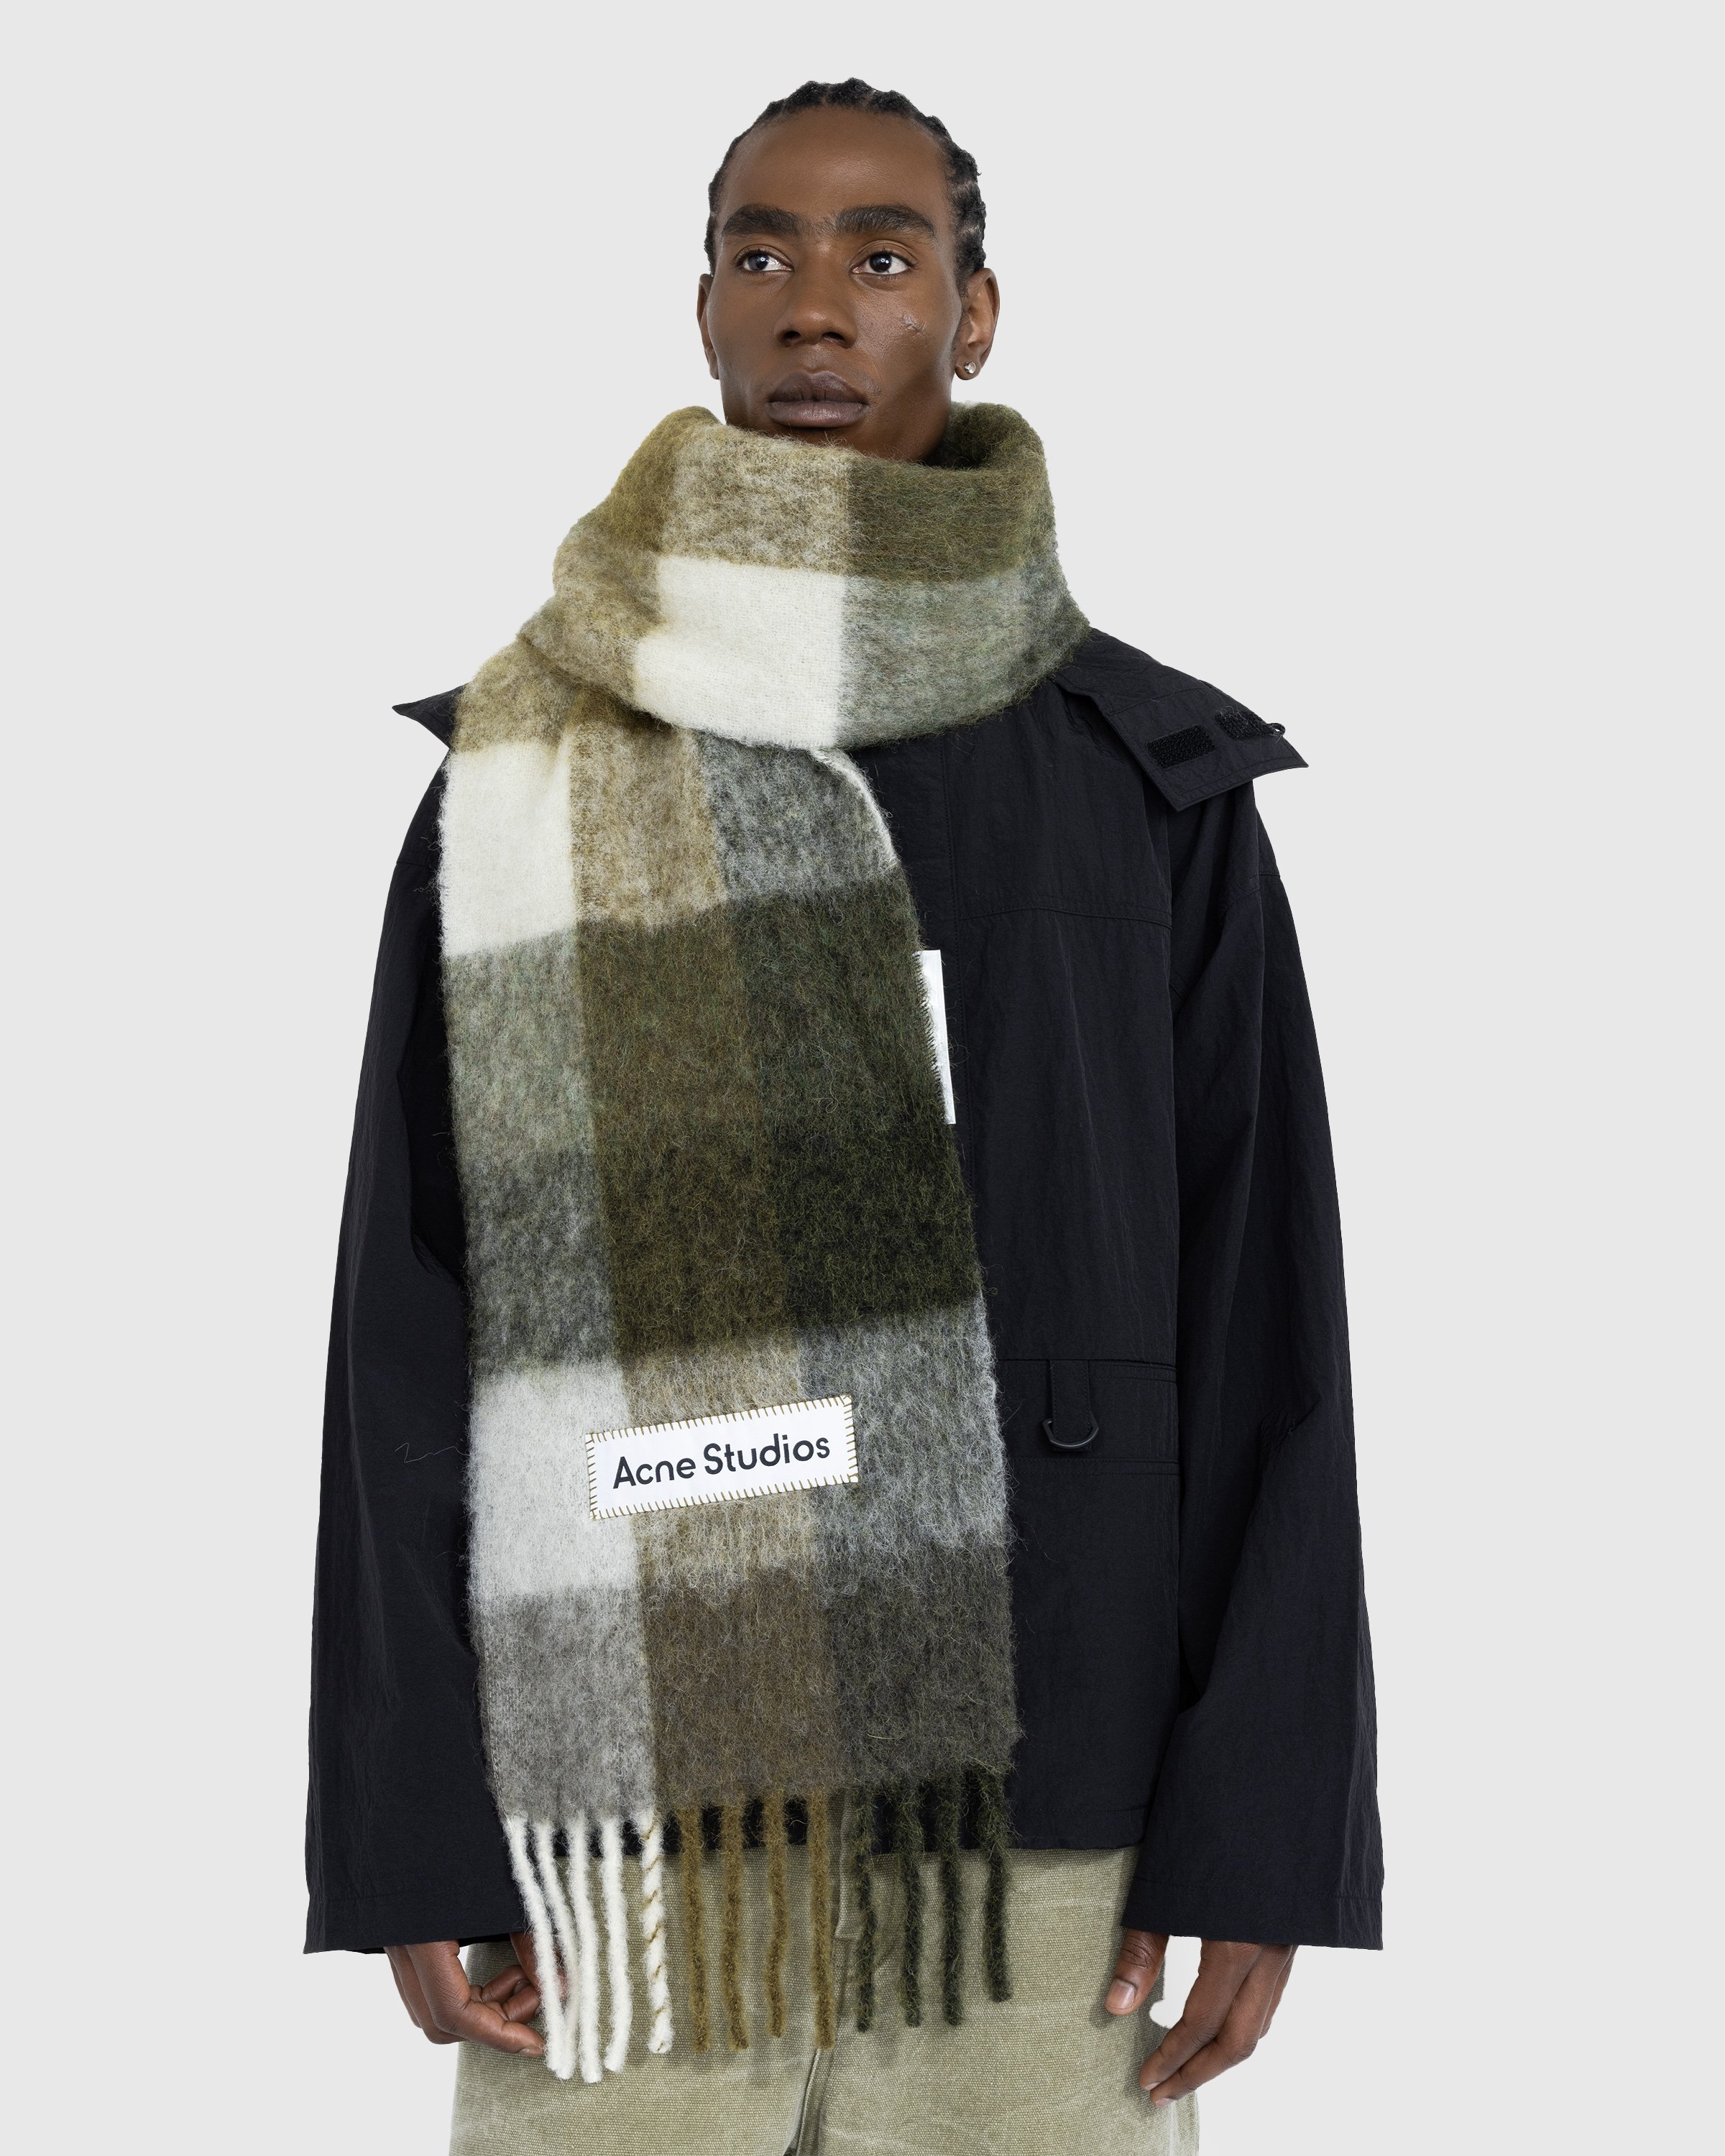 Acne Studios - Mohair Checked Scarf Taupe/Green/Black - Accessories - Multi - Image 3